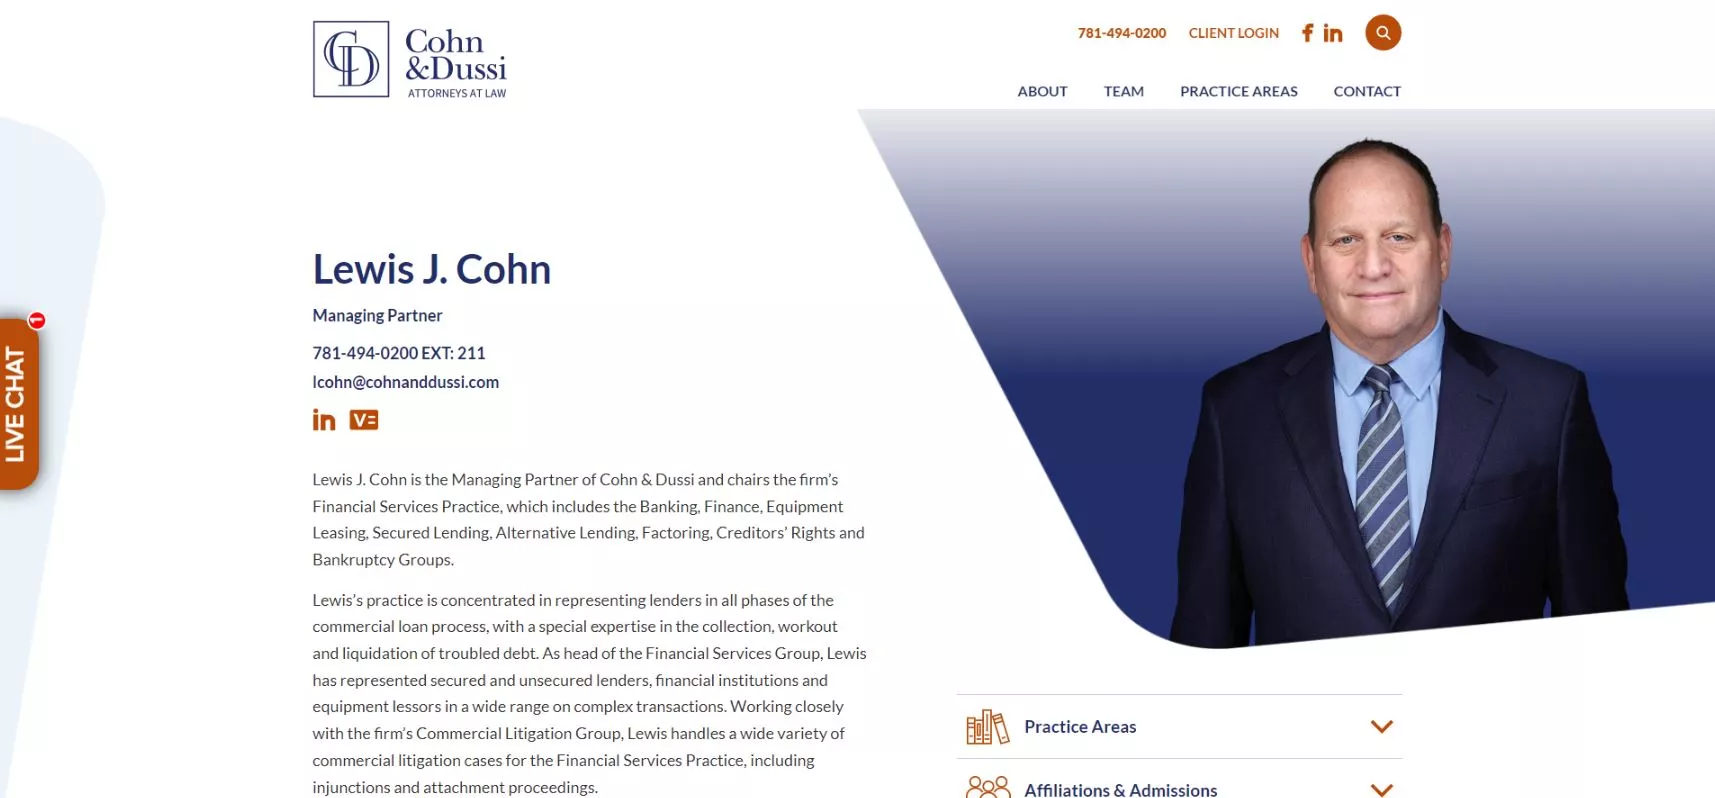 custom landing pages in our website design project for Cohn & Dussi Attorneys at Law